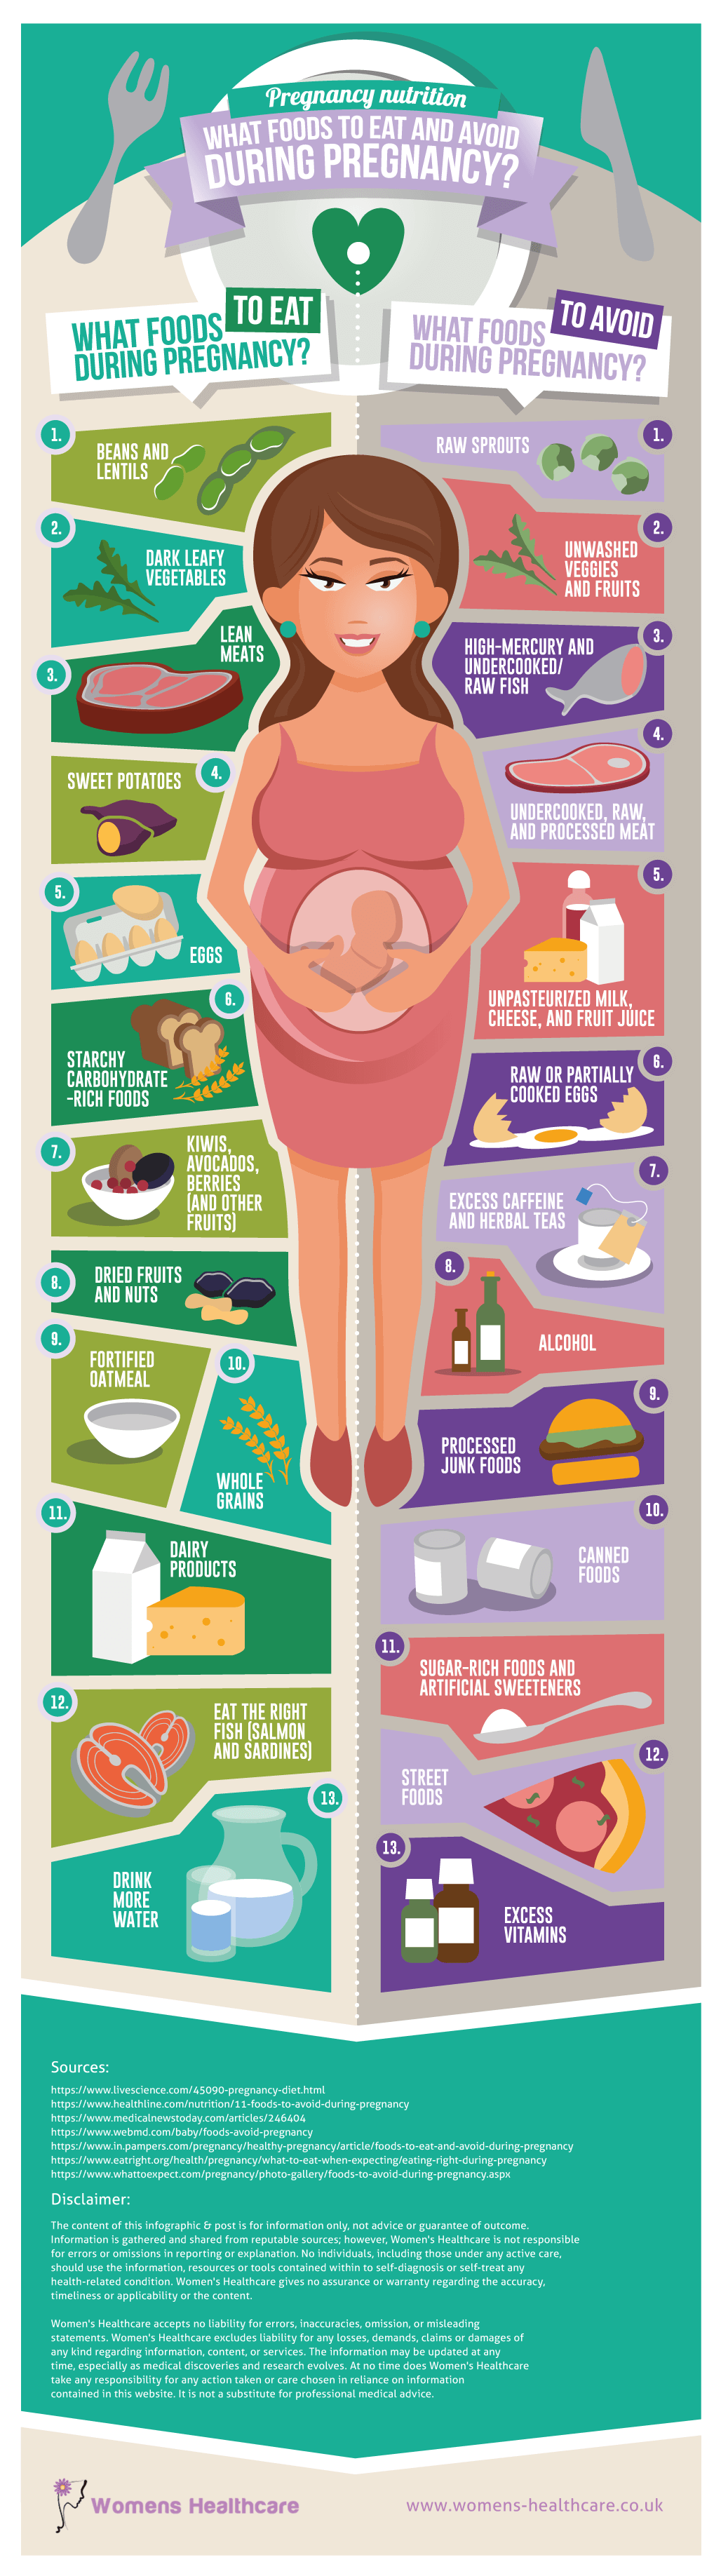 pregnancy nutrition infographic